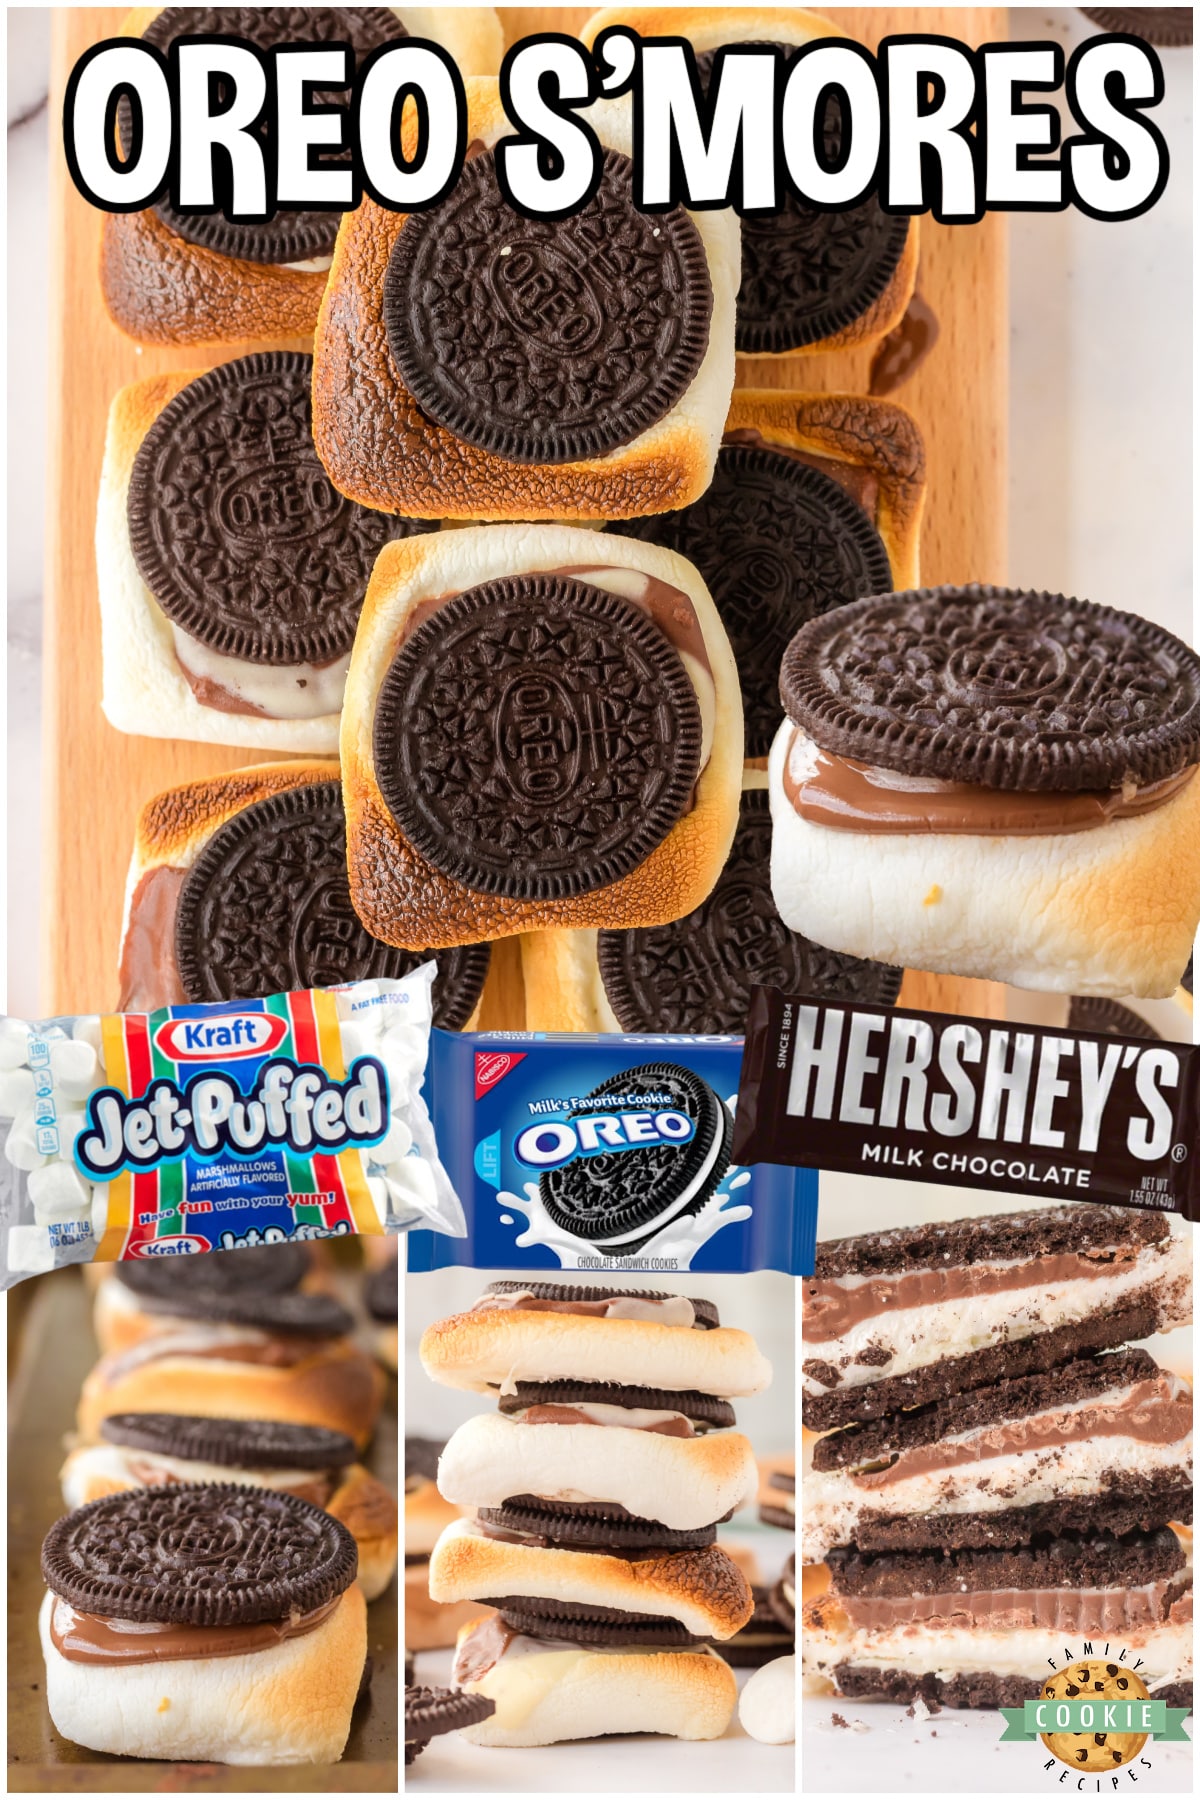 Oreo S’mores are sweet, crunchy, gooey, & super chocolatey! These oven baked S’moreos are going to be your new favorite summertime treat!